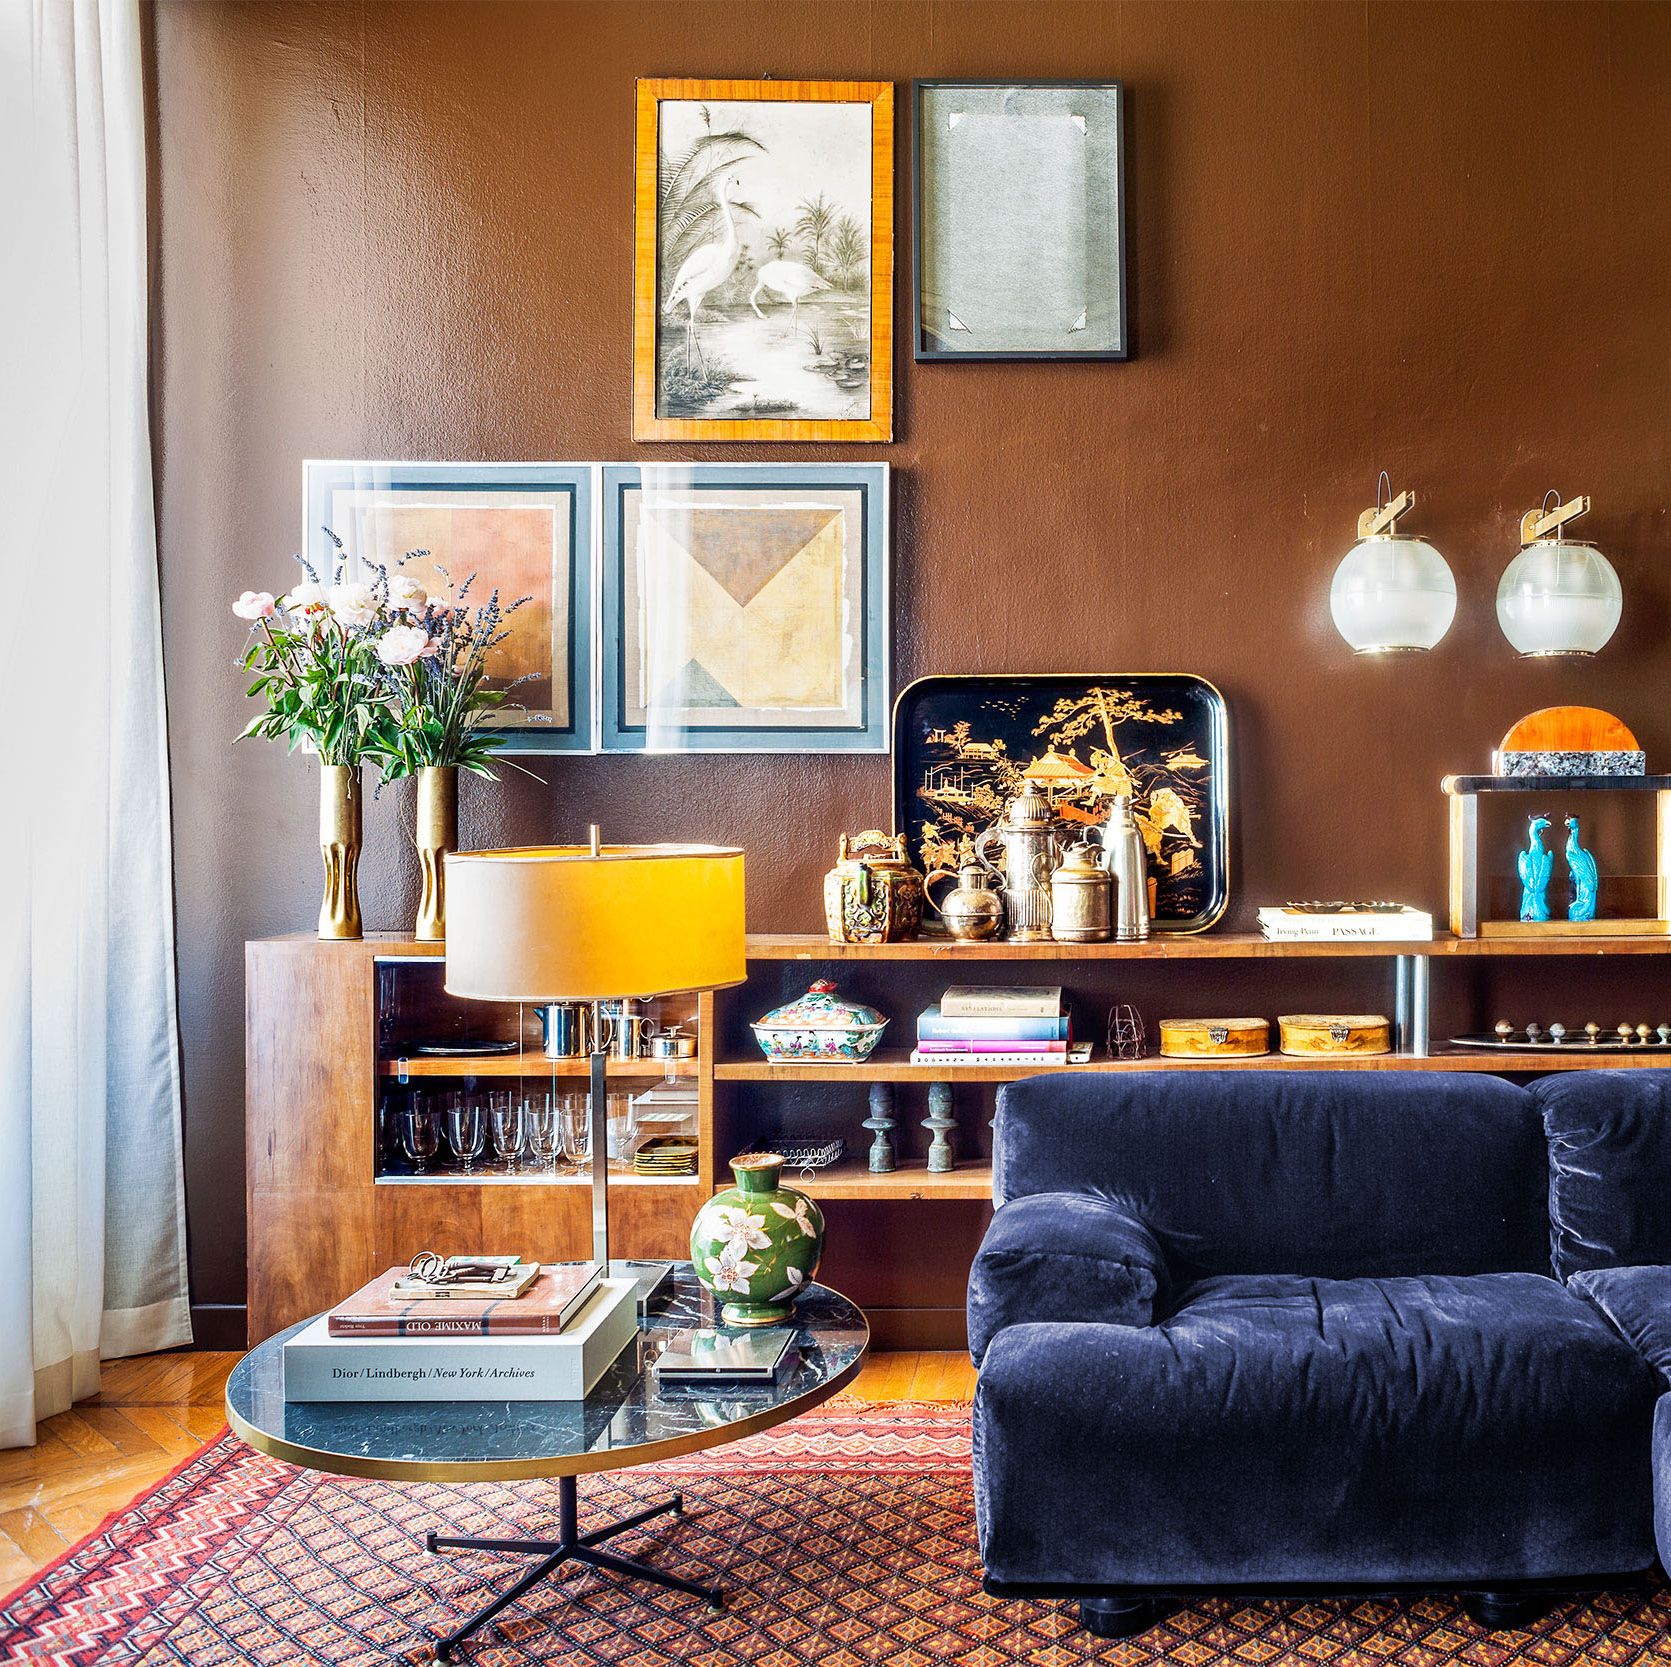 This Milan Apartment Is a Master Class on Renovating During a Pandemic